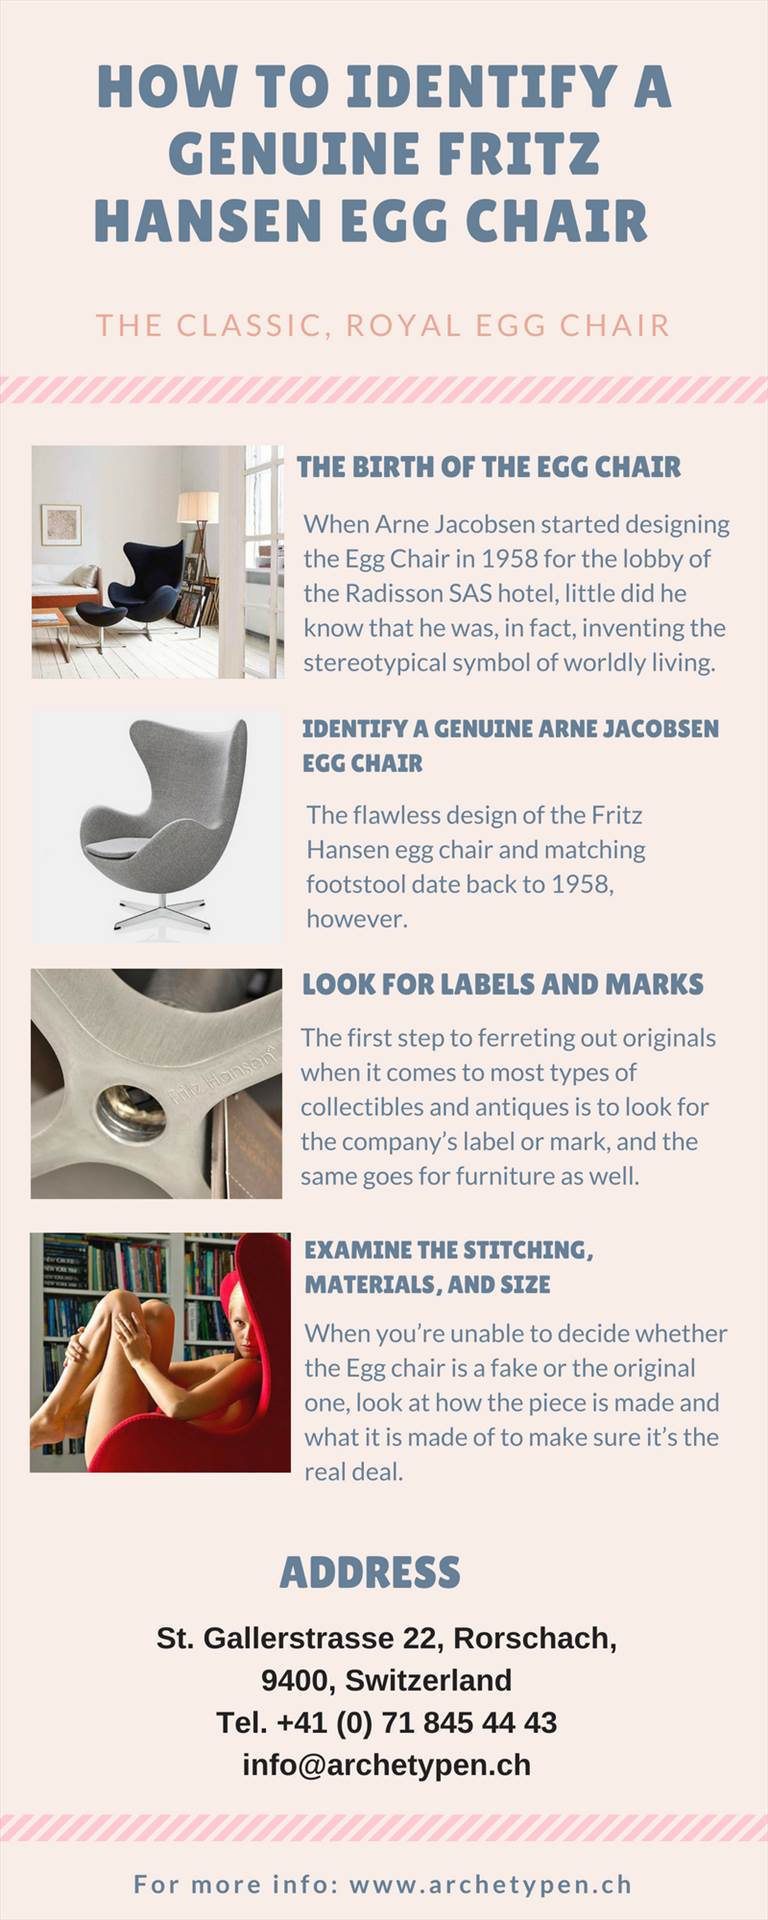 HOW TO IDENTIFY A GENUINE FRITZ HANSEN EGG CHAIR.jpg One of the most recognizable and iconic pieces of furniture in Danish design history, Arne Jacobsen's classic Egg Chair has earned a place in the heart of many. Learn how to tell it’s not a fake.  
https://goo.gl/SaN1M5 by archetypen